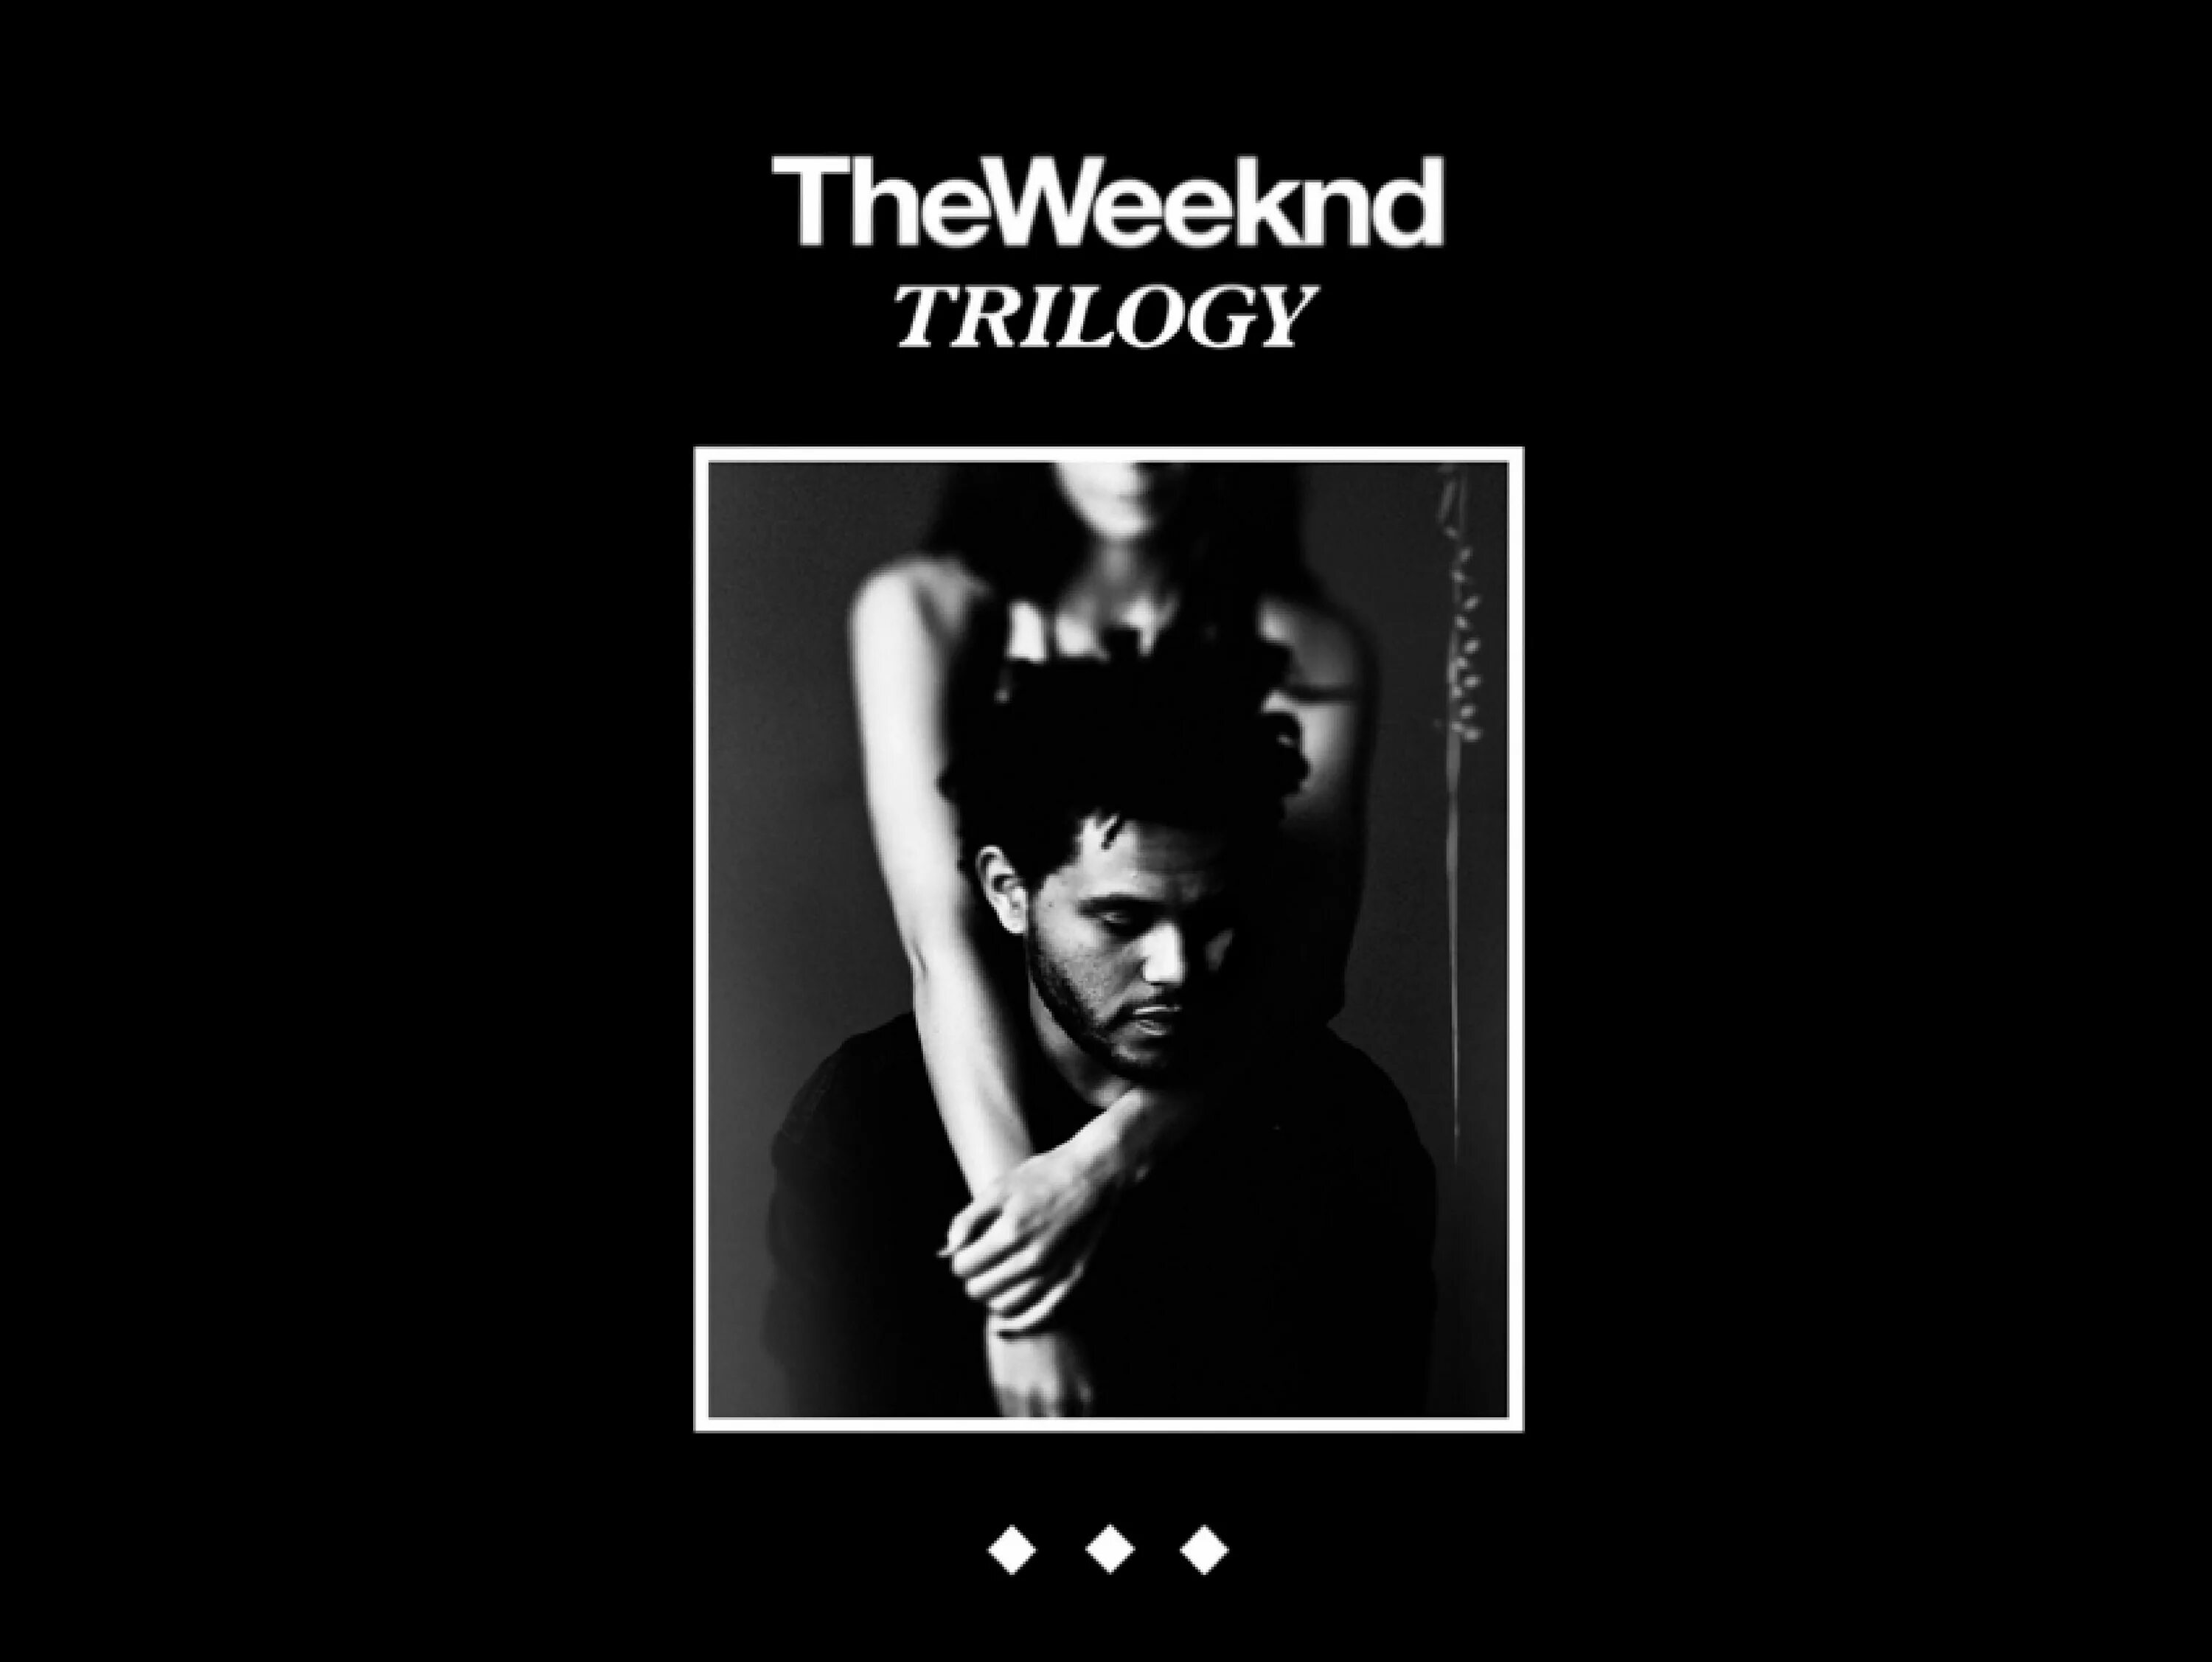 The Weeknd обложка. The Weeknd Trilogy. The Weeknd Trilogy обложка. The Weeknd twenty eight. Песня the weeknd one of the girl